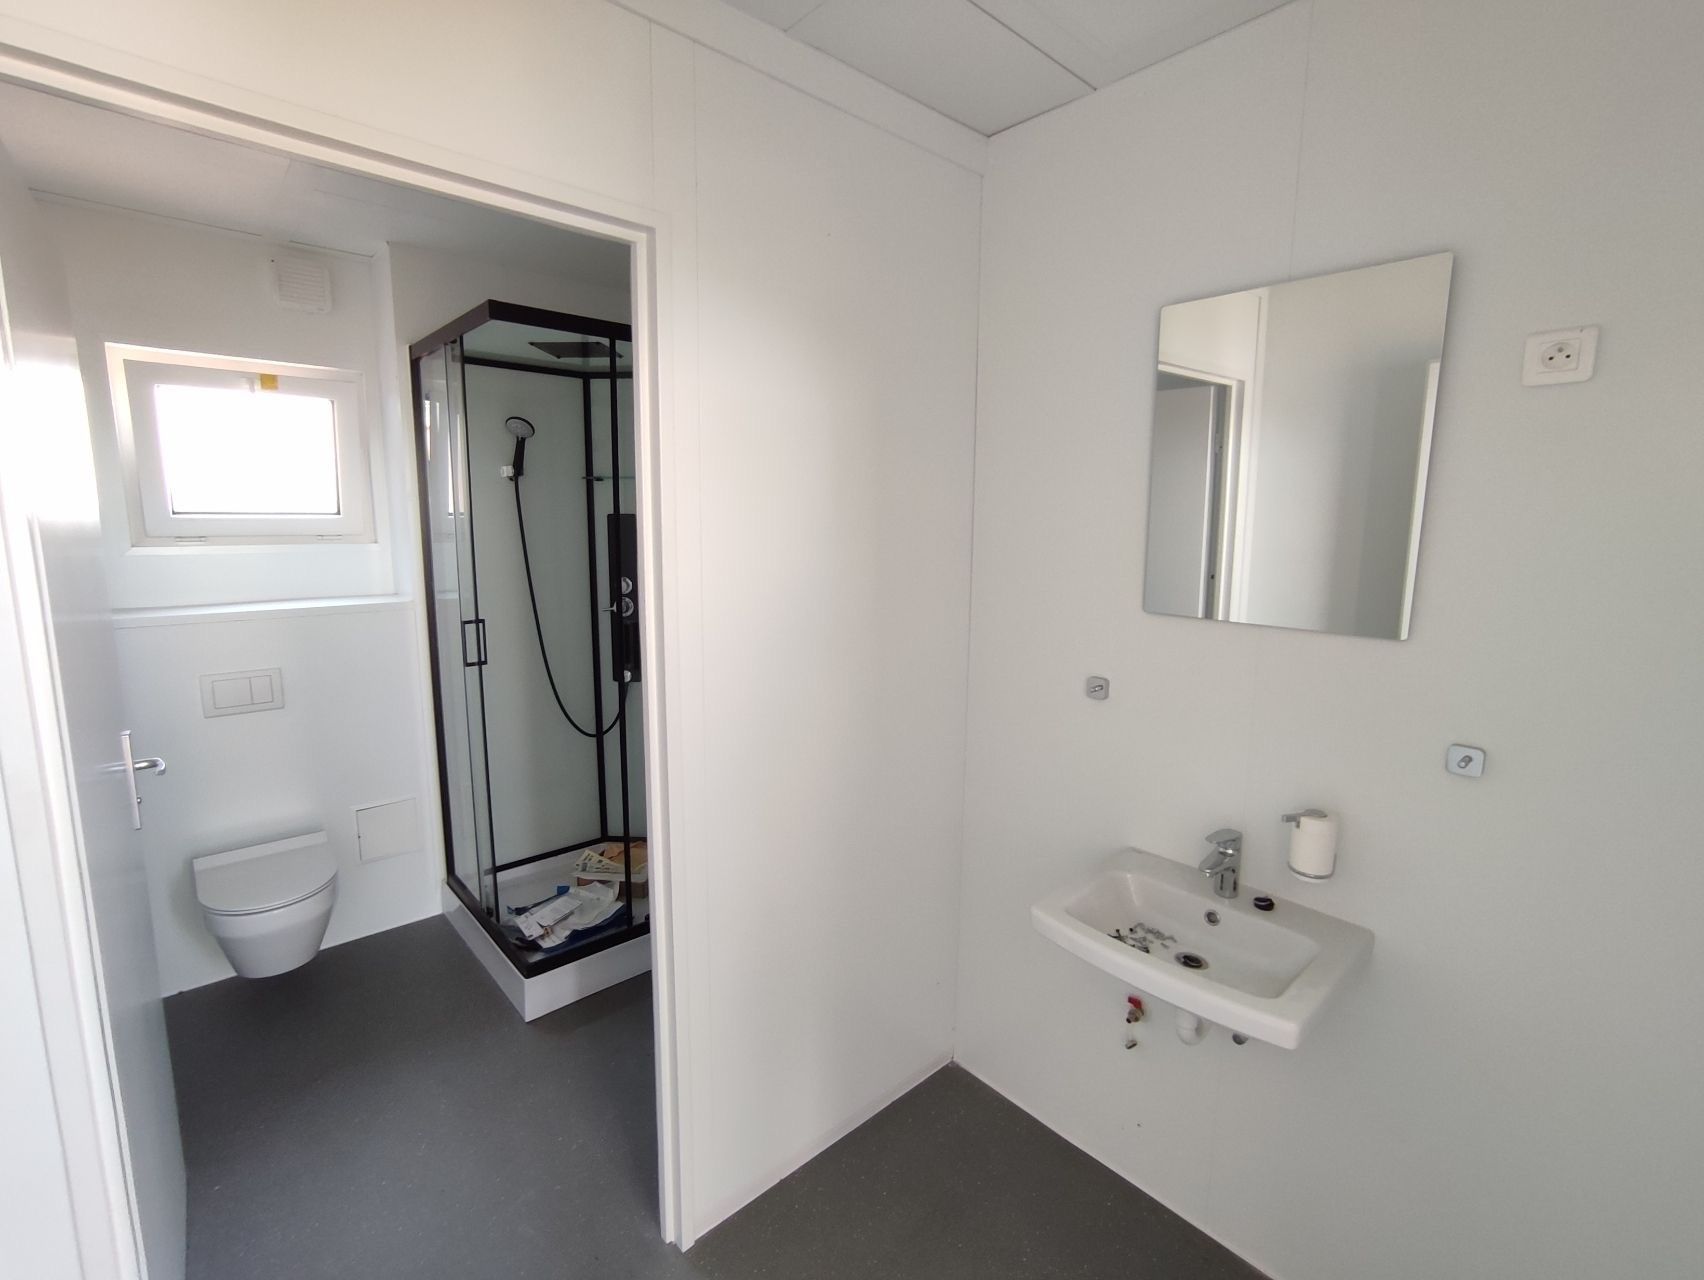 Sanitary facilities with disabled access